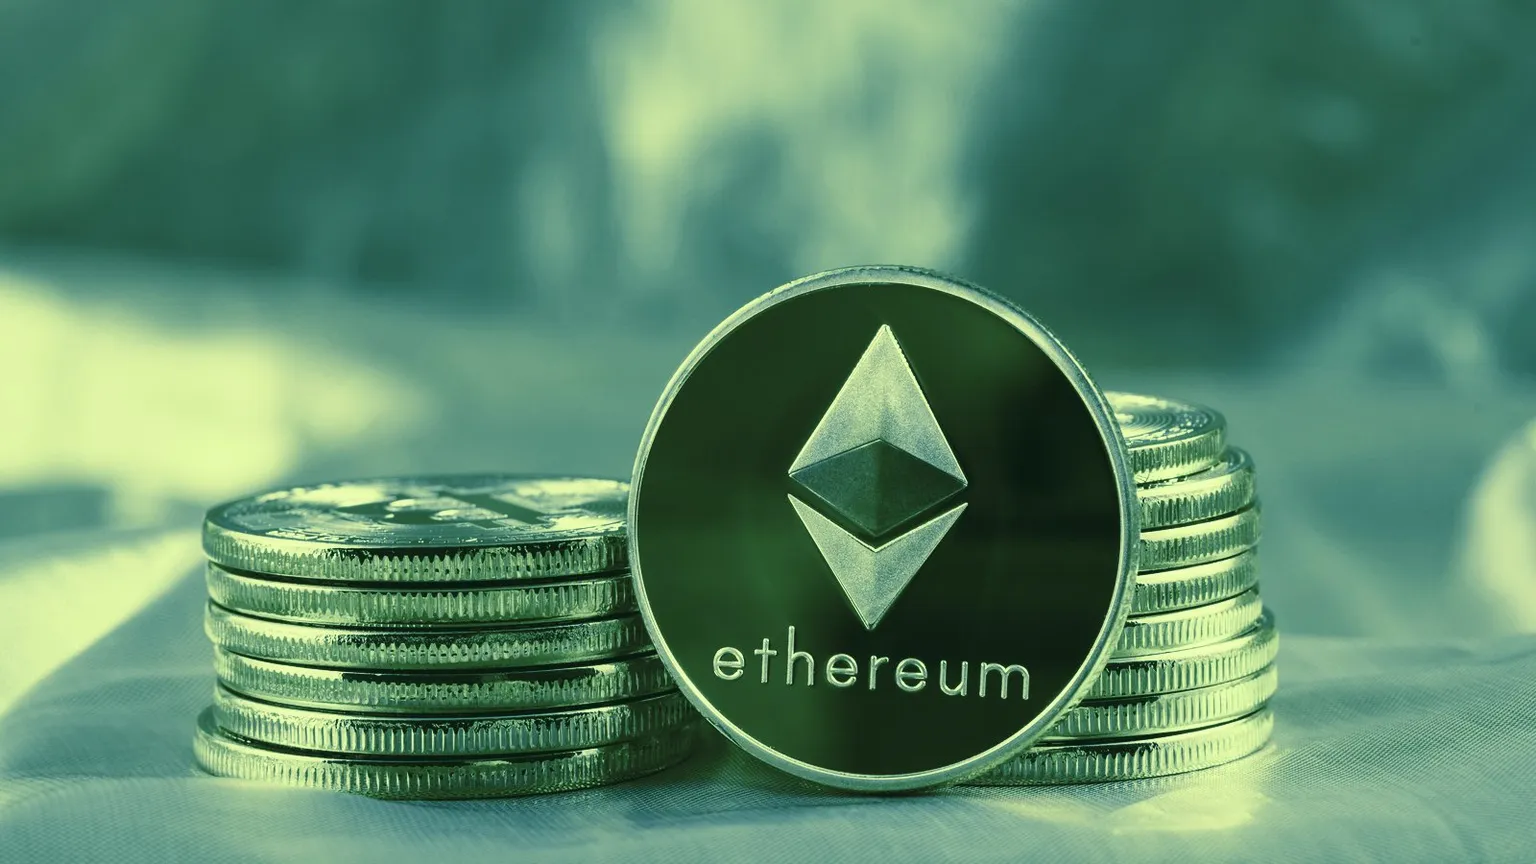 Ethereum is a smart contracts platform. Image: Shutterstock